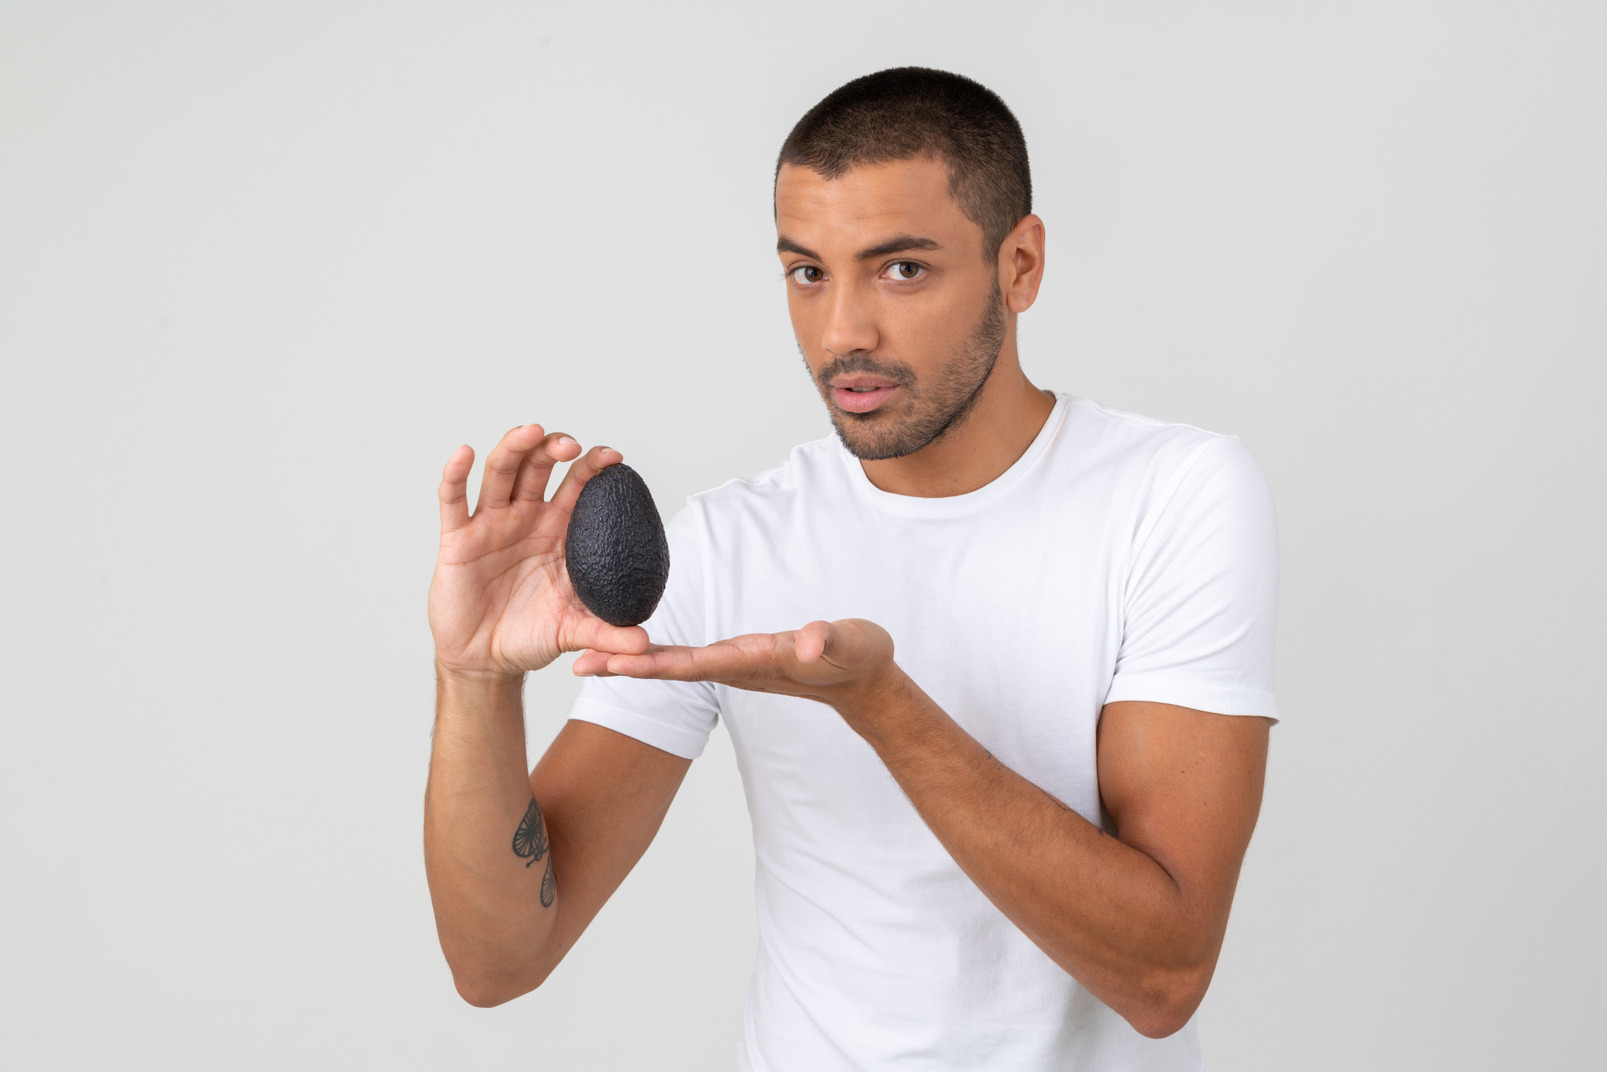 Young man in a white t-shirt holding an avocado